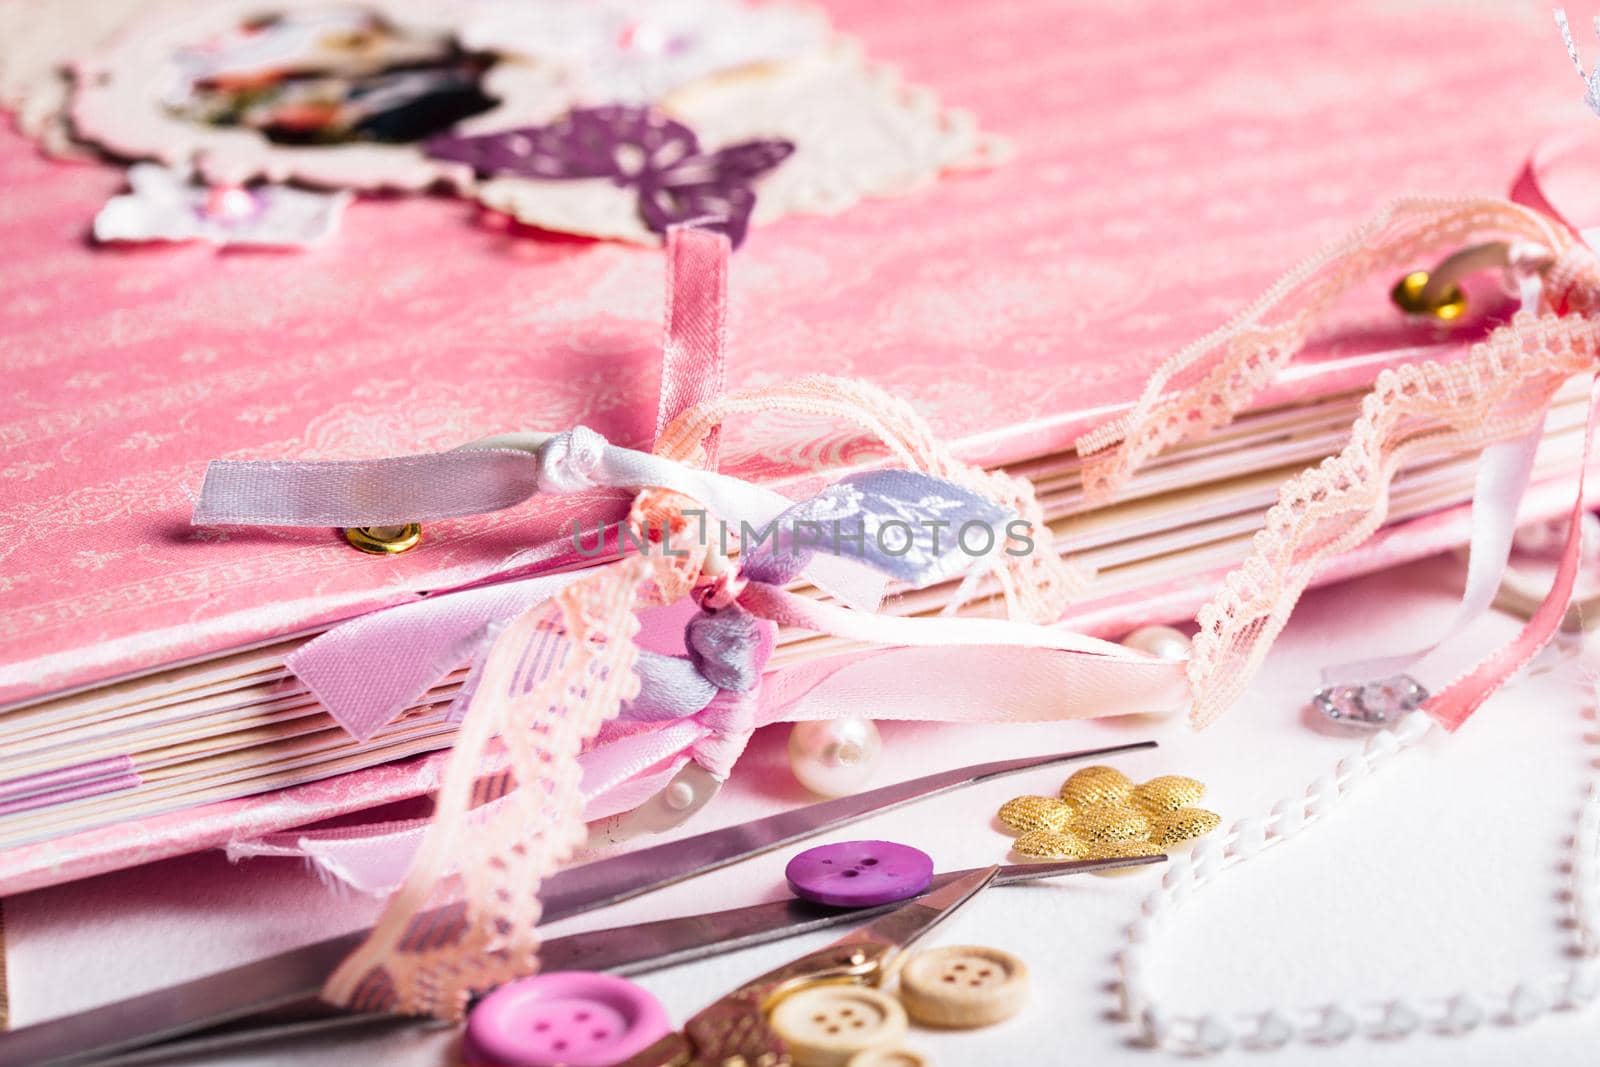 Making scrapbooking album with rings and decorations on the table and tools